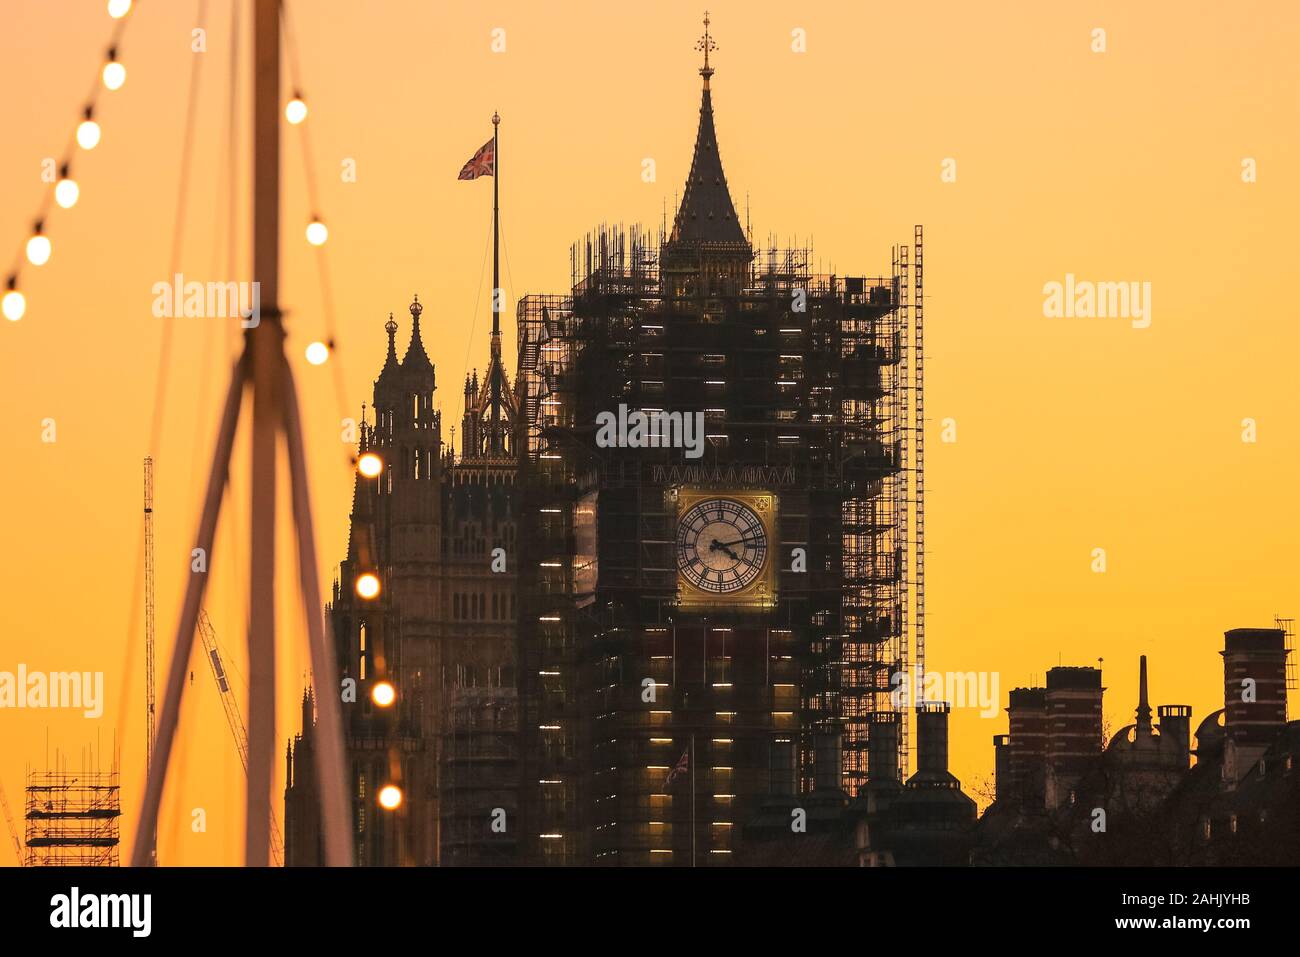 Westminster, London, 30th Dec 2019. The new blue and gold-leaf coloured clock face of the Elizabeth Tower is visible on the Houses of Parliament,  silhouetted at sunset. A beautifully sunny winter day in London concludes with a soft pastel sunset in Westminster. Credit: Imageplotter/Alamy Live News Stock Photo